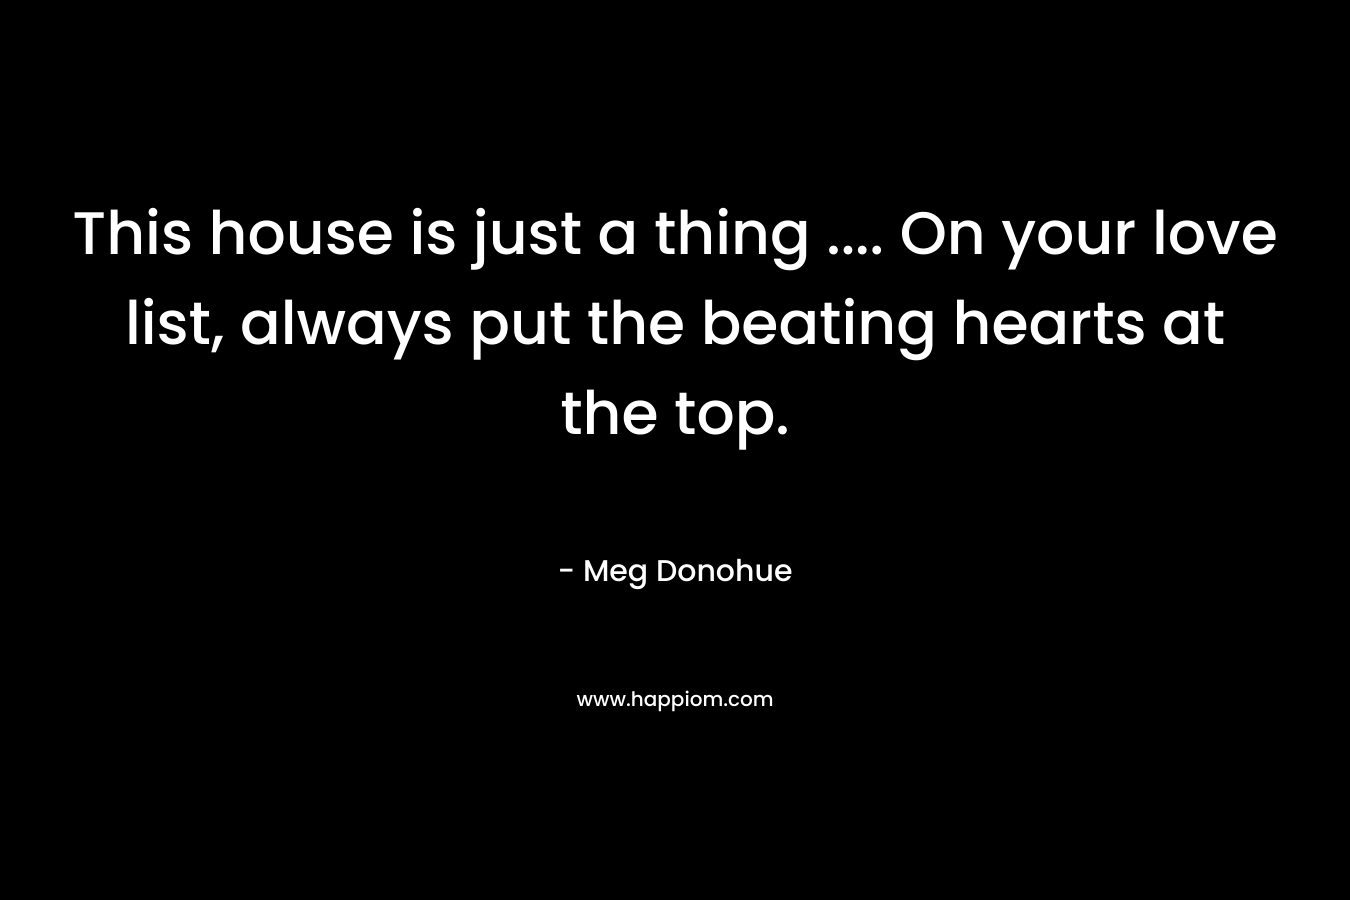 This house is just a thing .... On your love list, always put the beating hearts at the top.